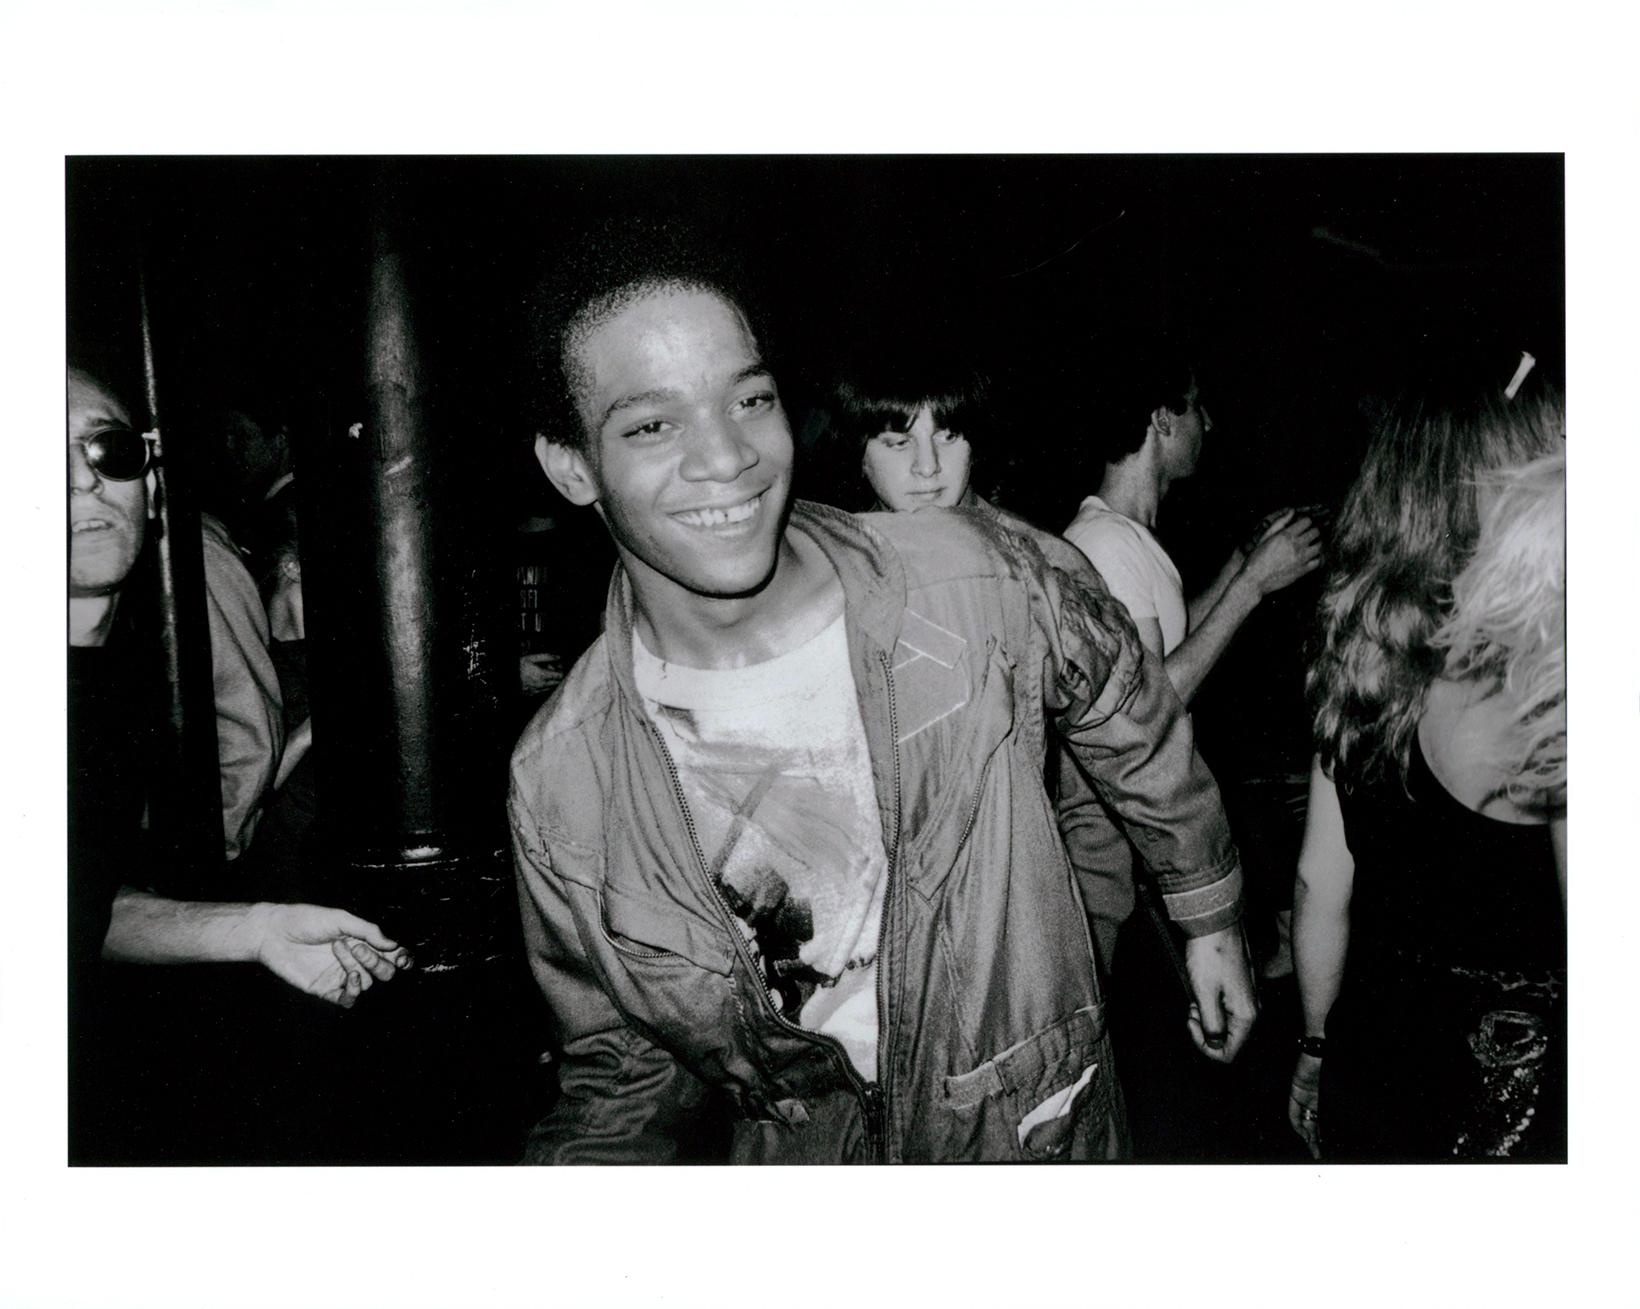 BASQUIAT Dancing at The Mudd Club, 1979 (Basquiat Boom For Real photograph) - Photograph by Nicholas Taylor